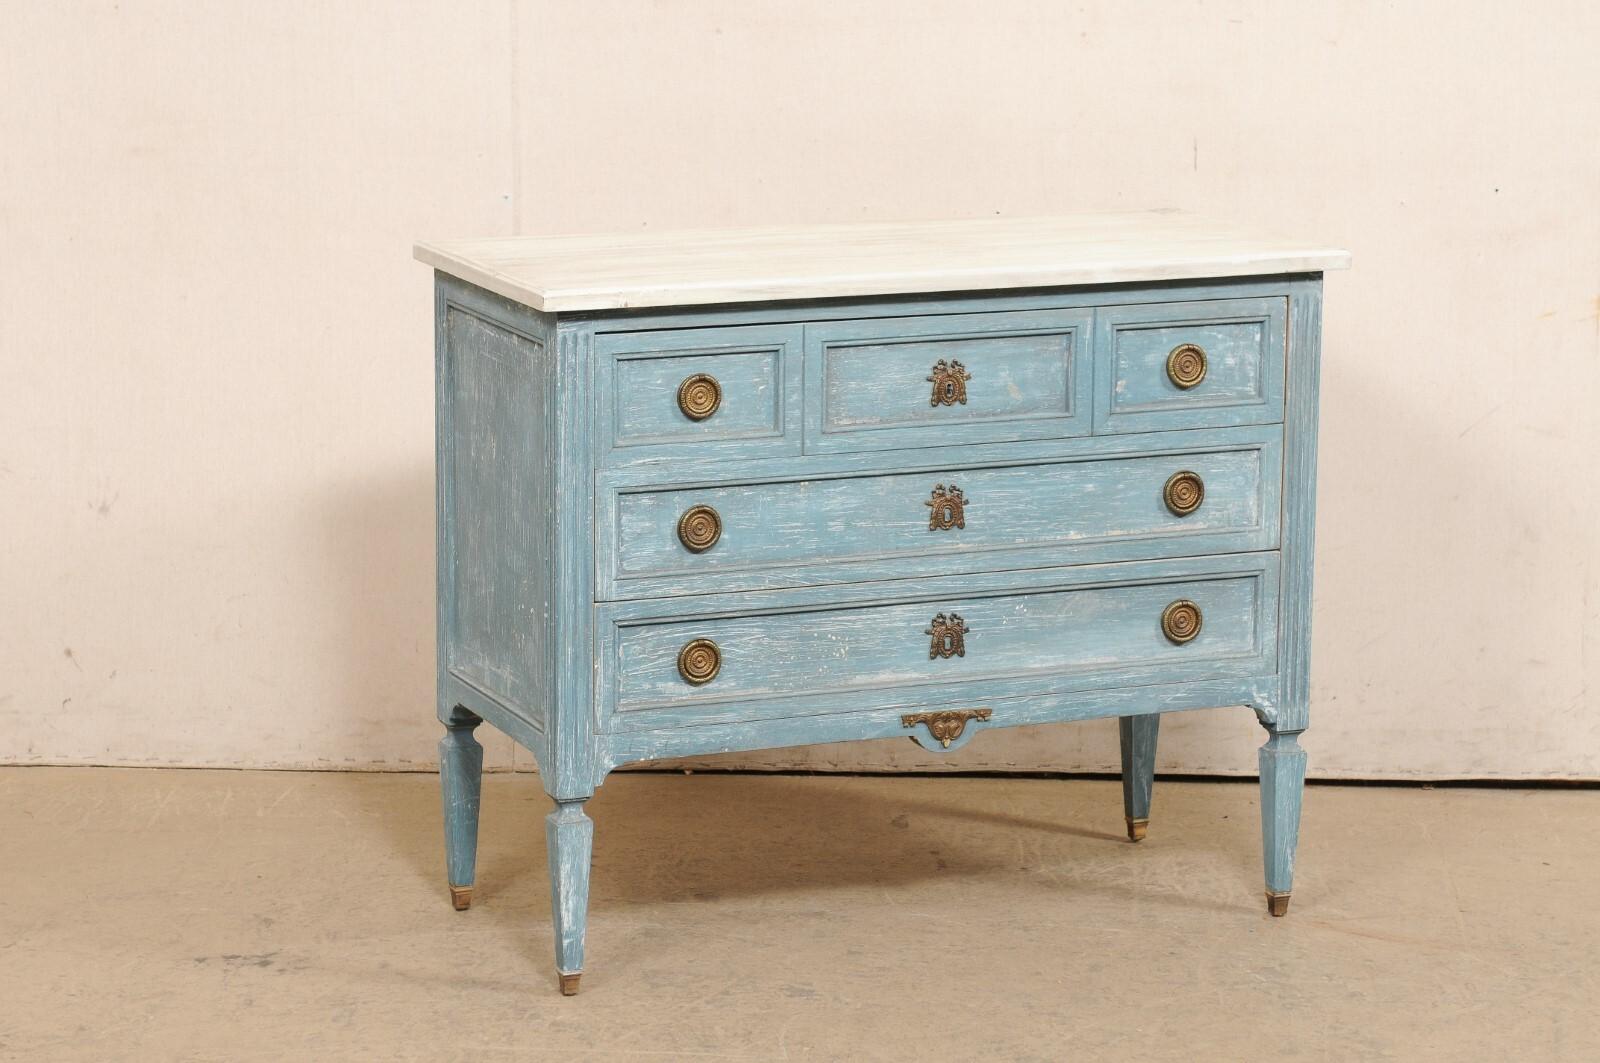 A French Neoclassical style painted wood commode from the mid 20th century. This mid-century chest from France features a rectangular-shaped top, which rests above a neoclassical style case that houses three full-sized drawers flanked within